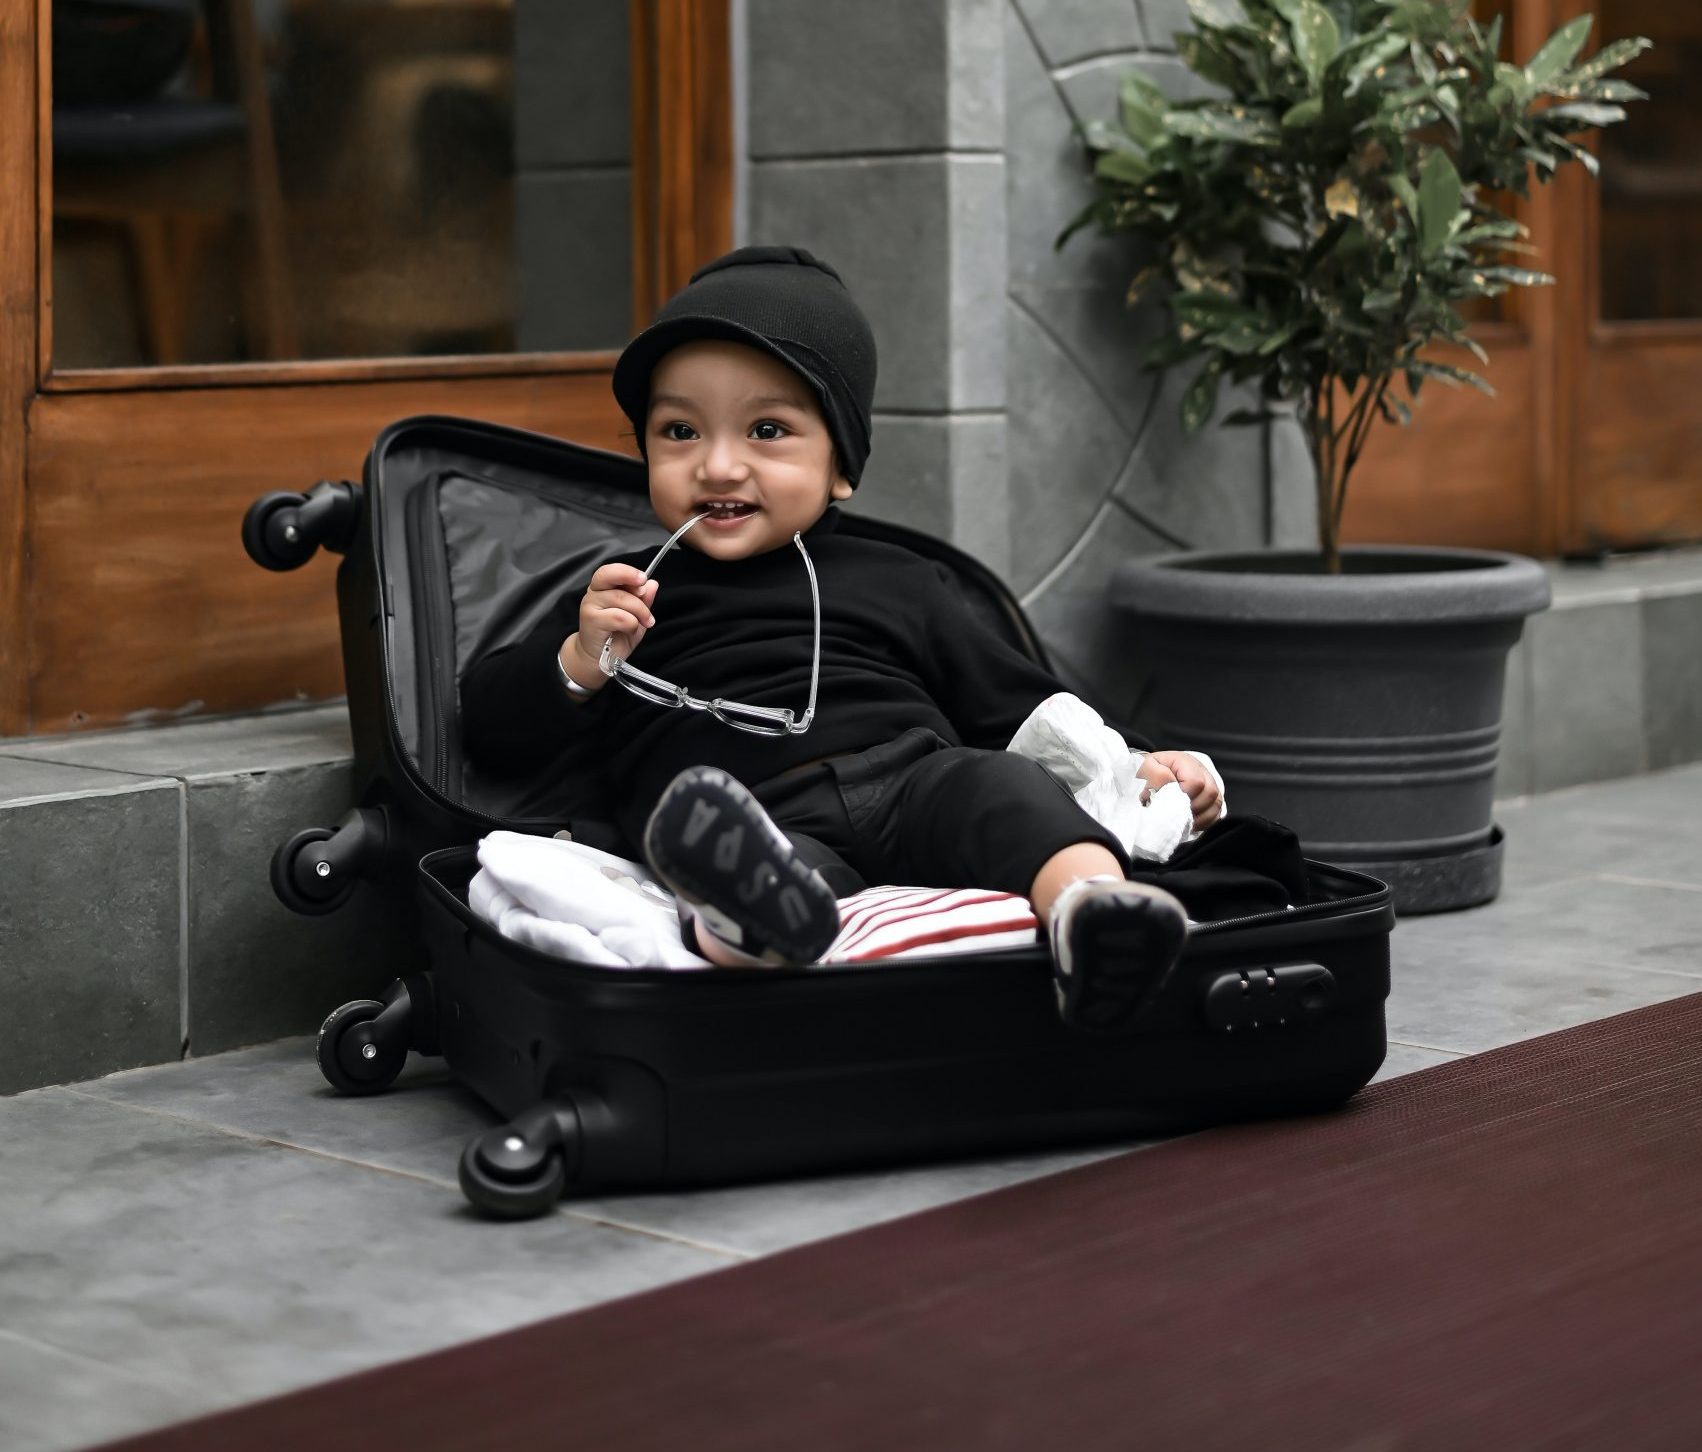 toddler chilling in the suitcase